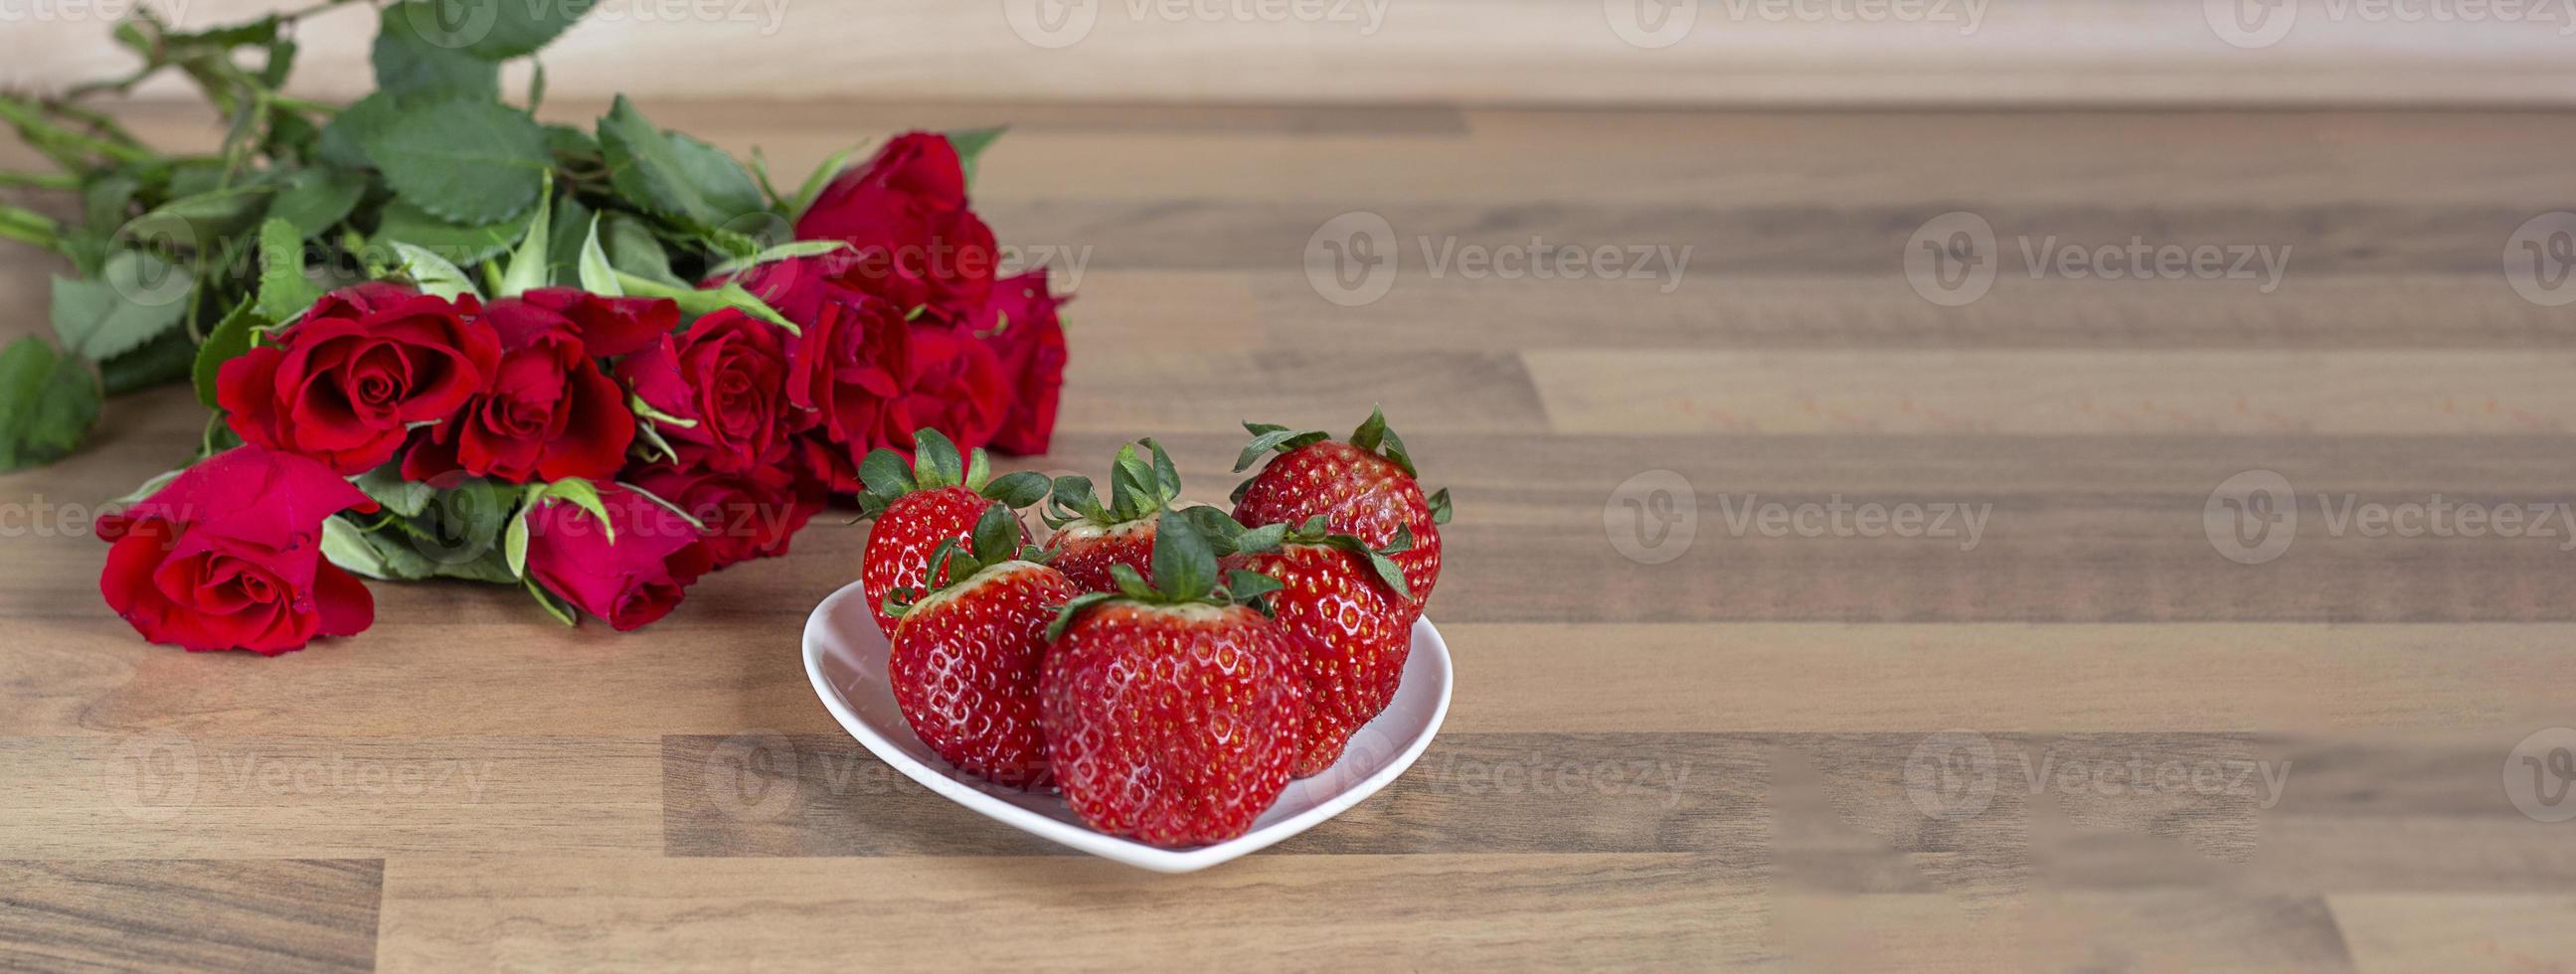 Valentine. Valentine background. Valentine's day concept red roses and strawberries in a plate photo